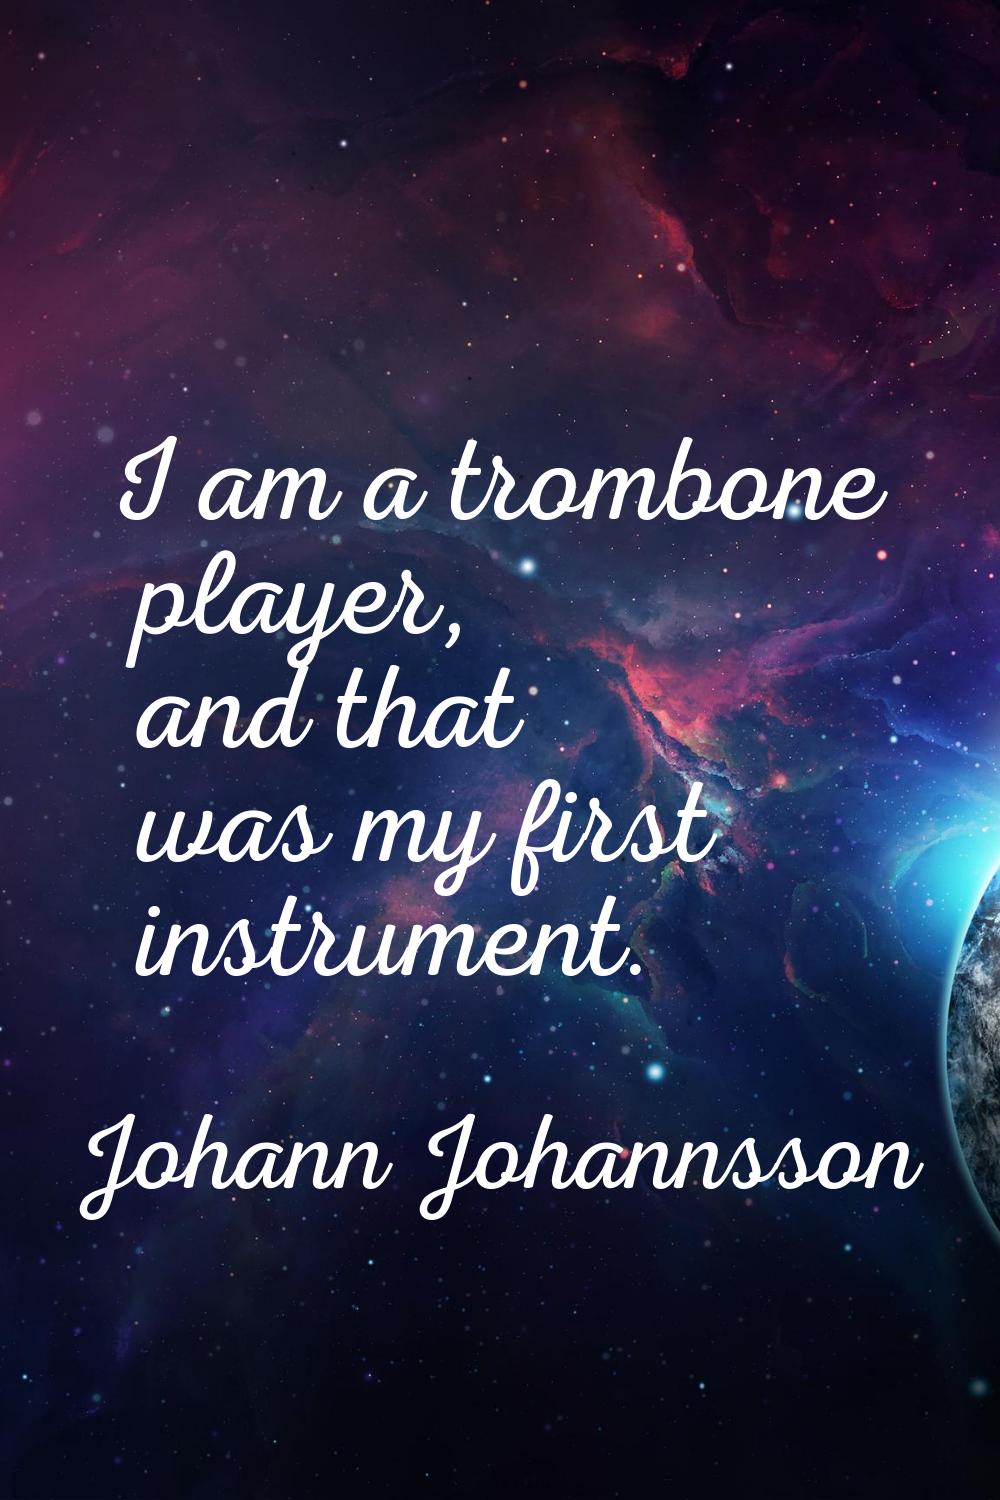 I am a trombone player, and that was my first instrument.